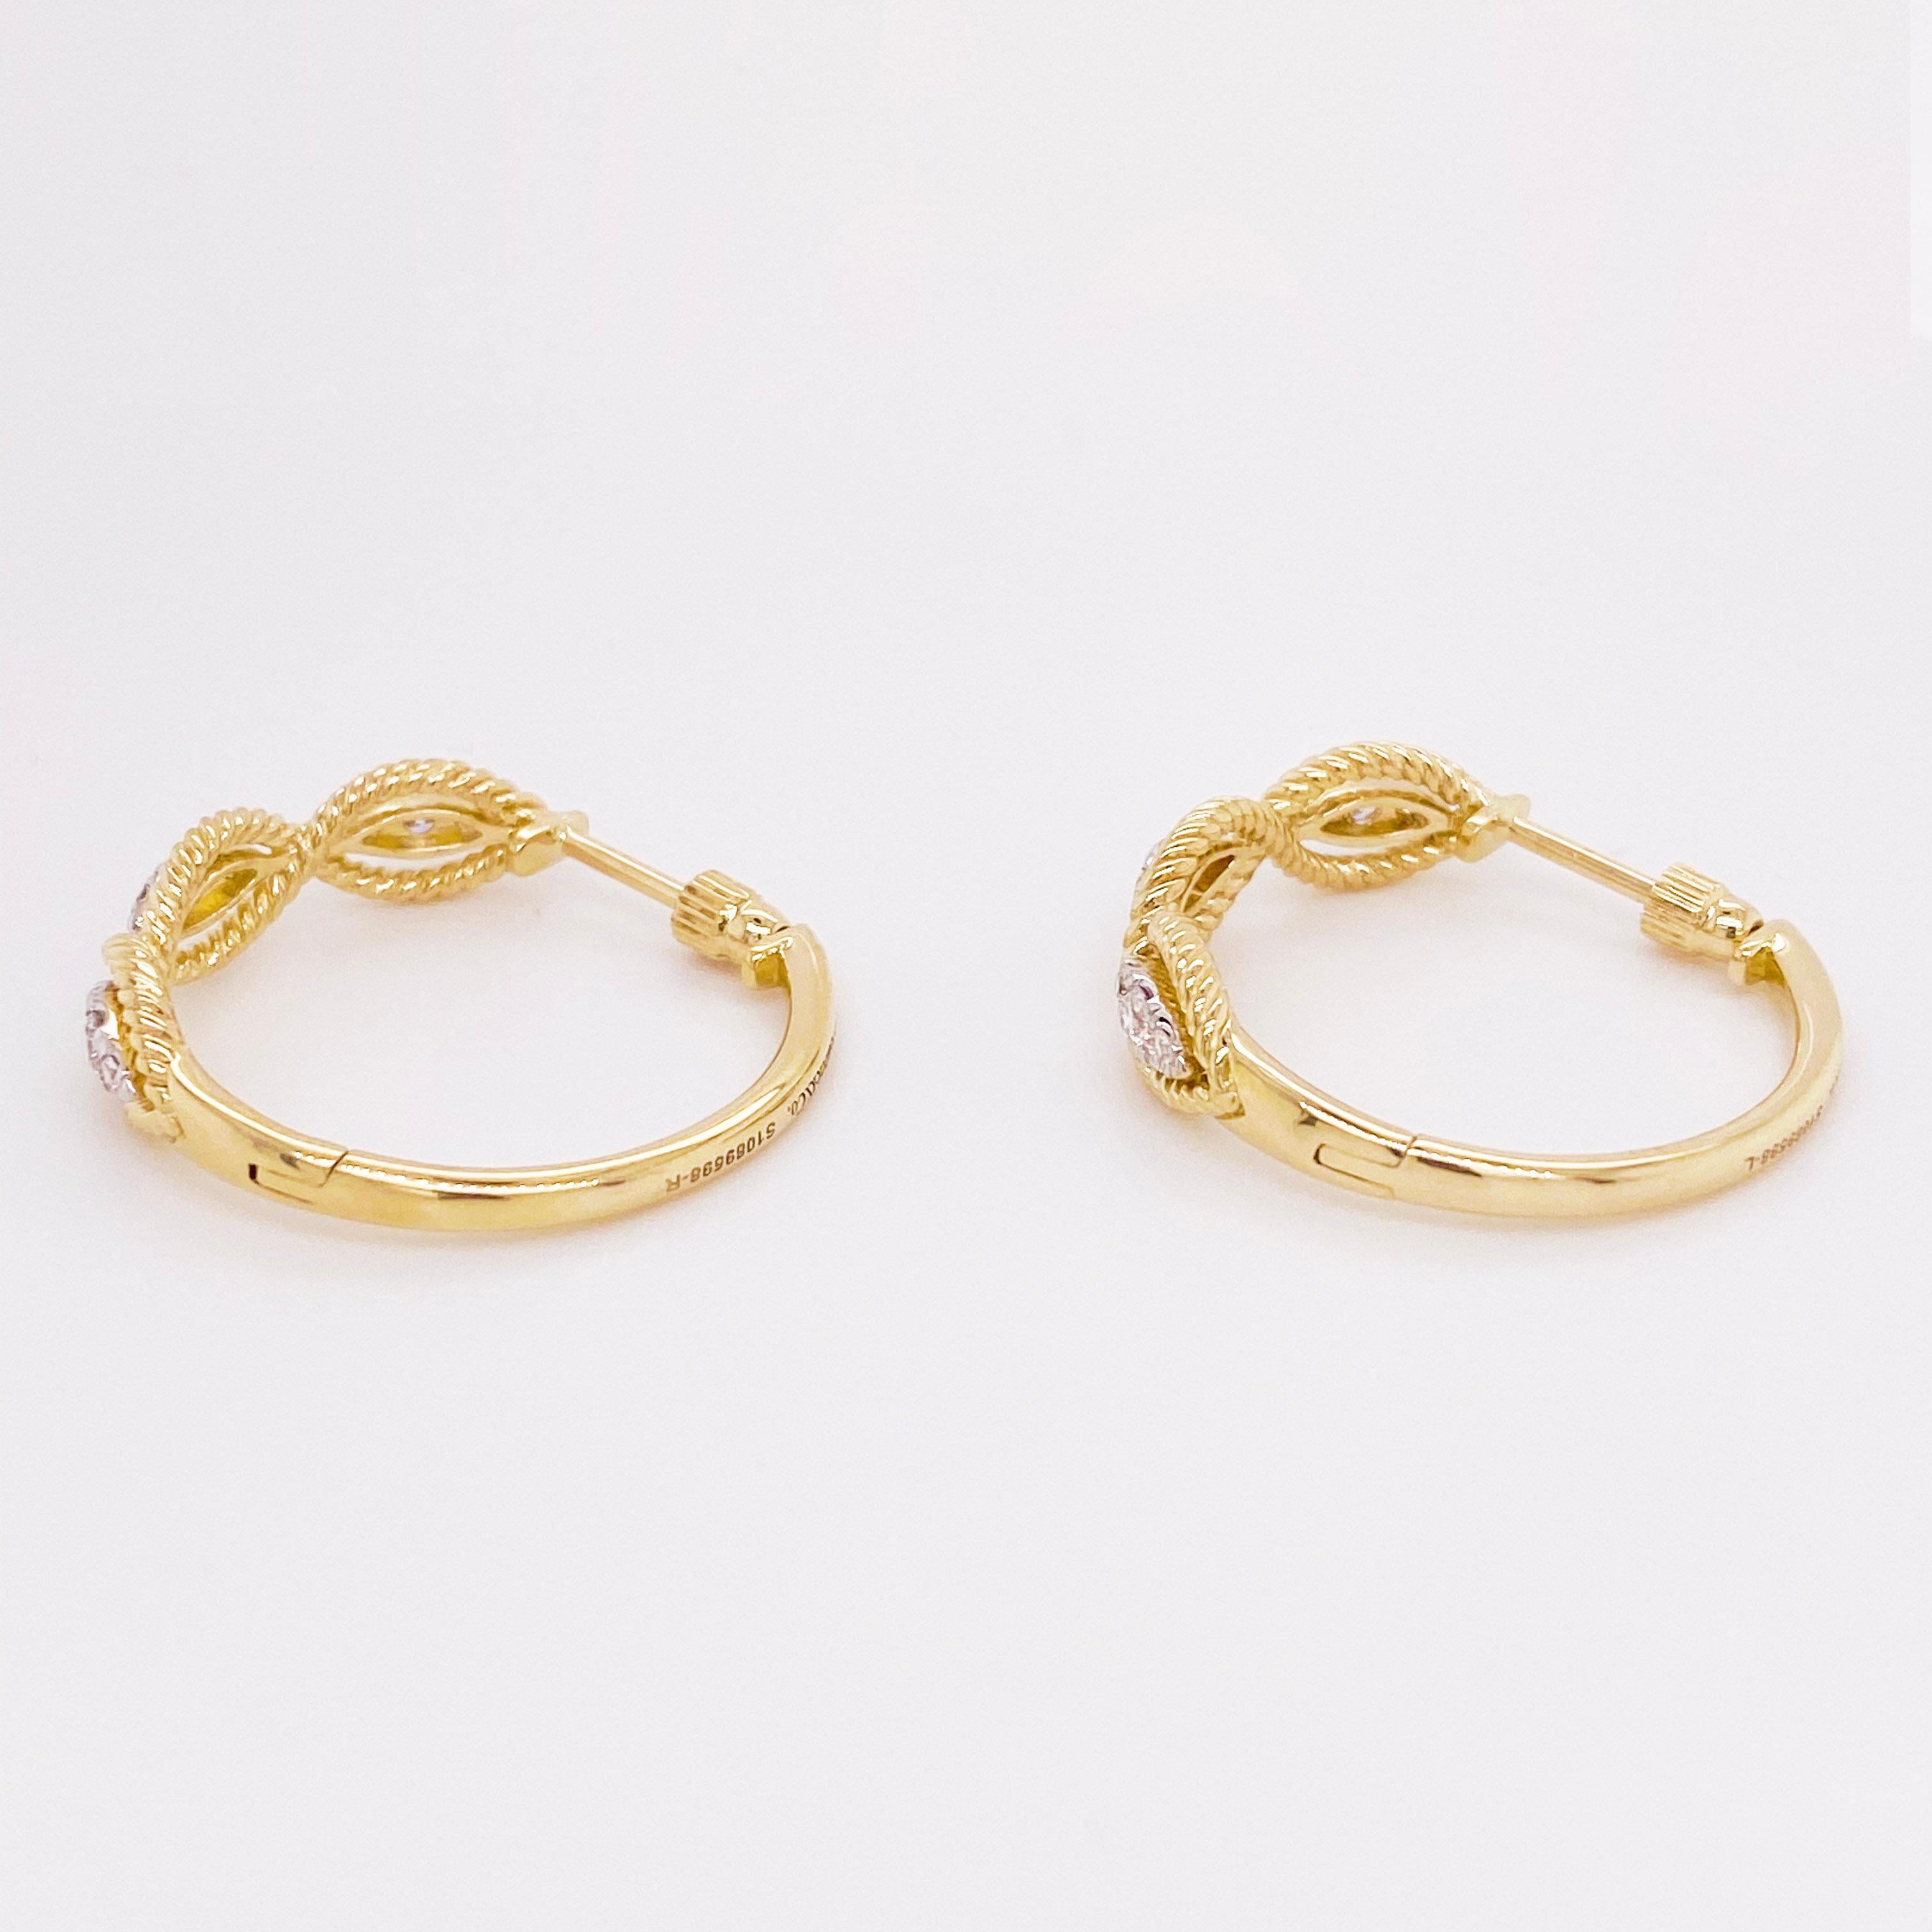 Diamond Hoop Earrings, 14 Karat Yellow Gold Twisted Layered, EG13651Y45JJ In New Condition For Sale In Austin, TX